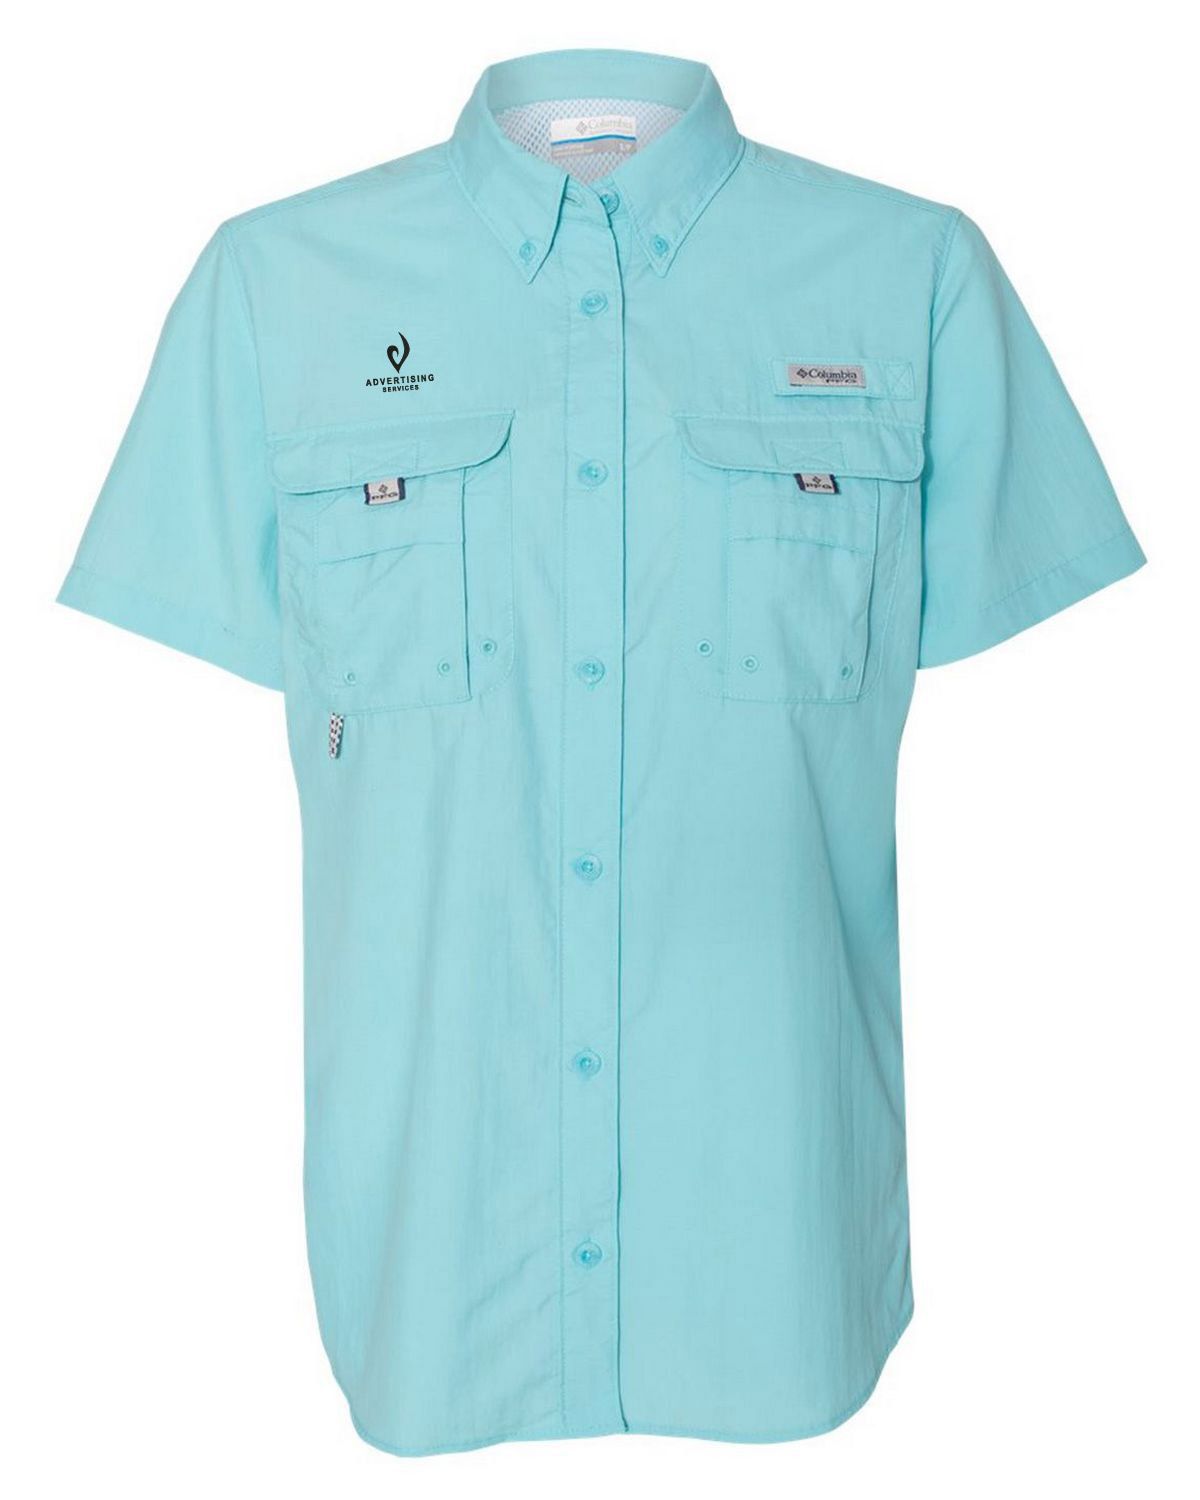 Affordable Wholesale pfg shirts For Smooth Fishing 